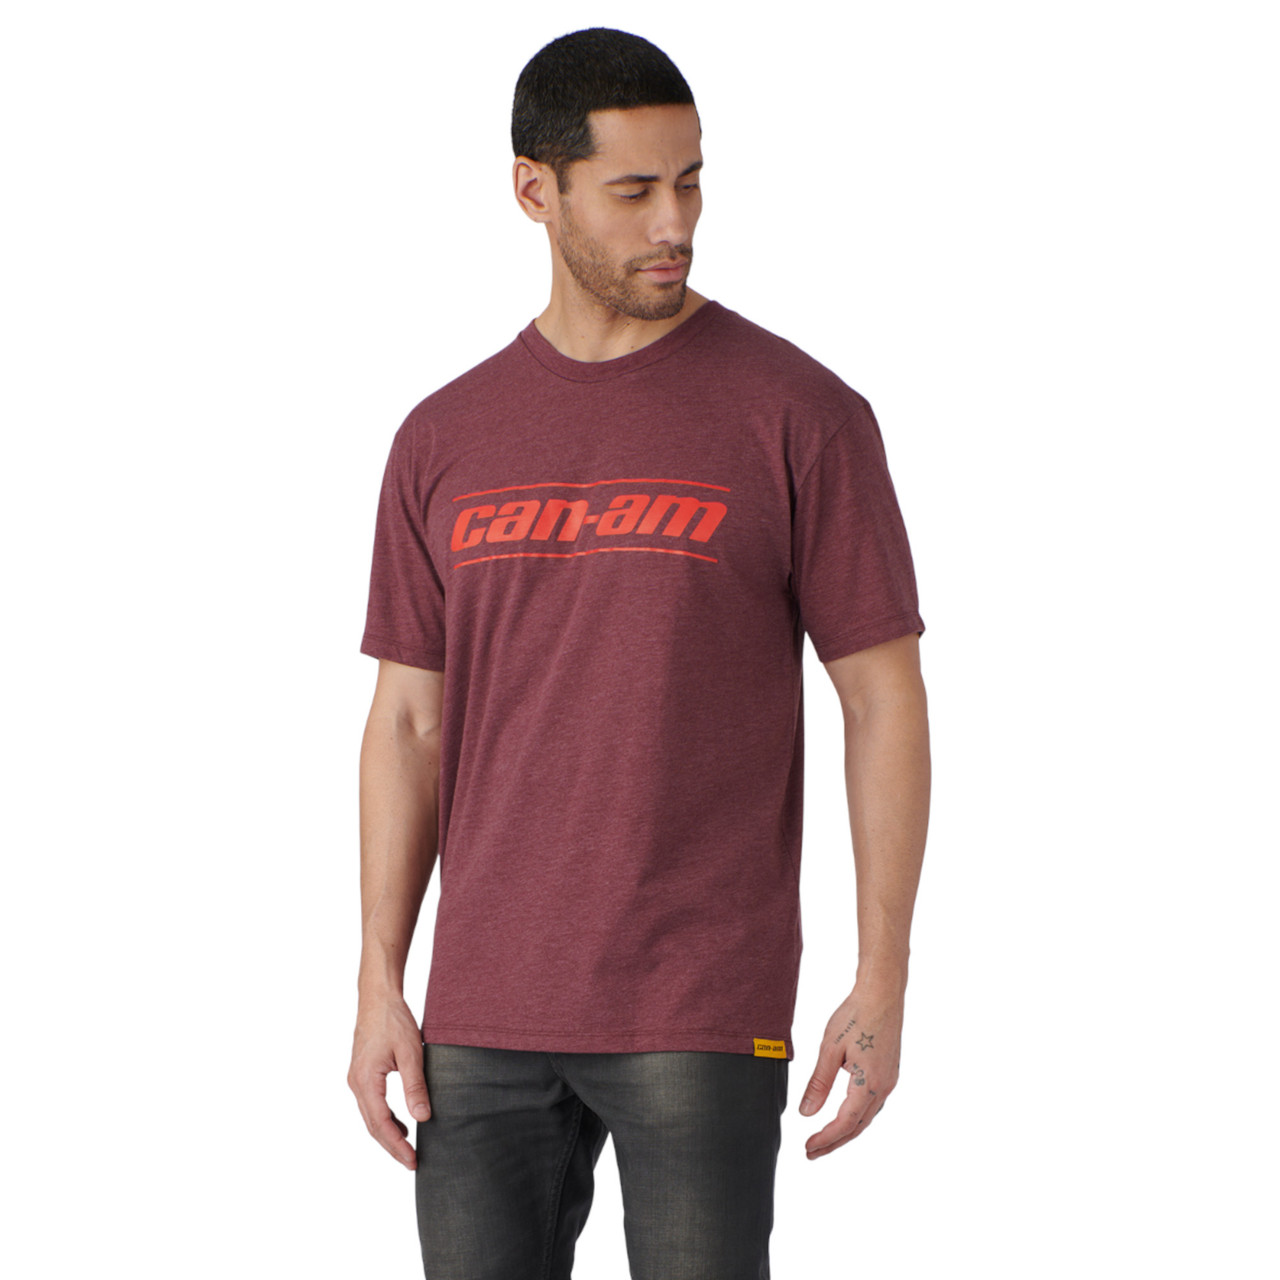 Can-Am New OEM, Men's Small Cotton Signature Branded T-Shirt, 4547540432